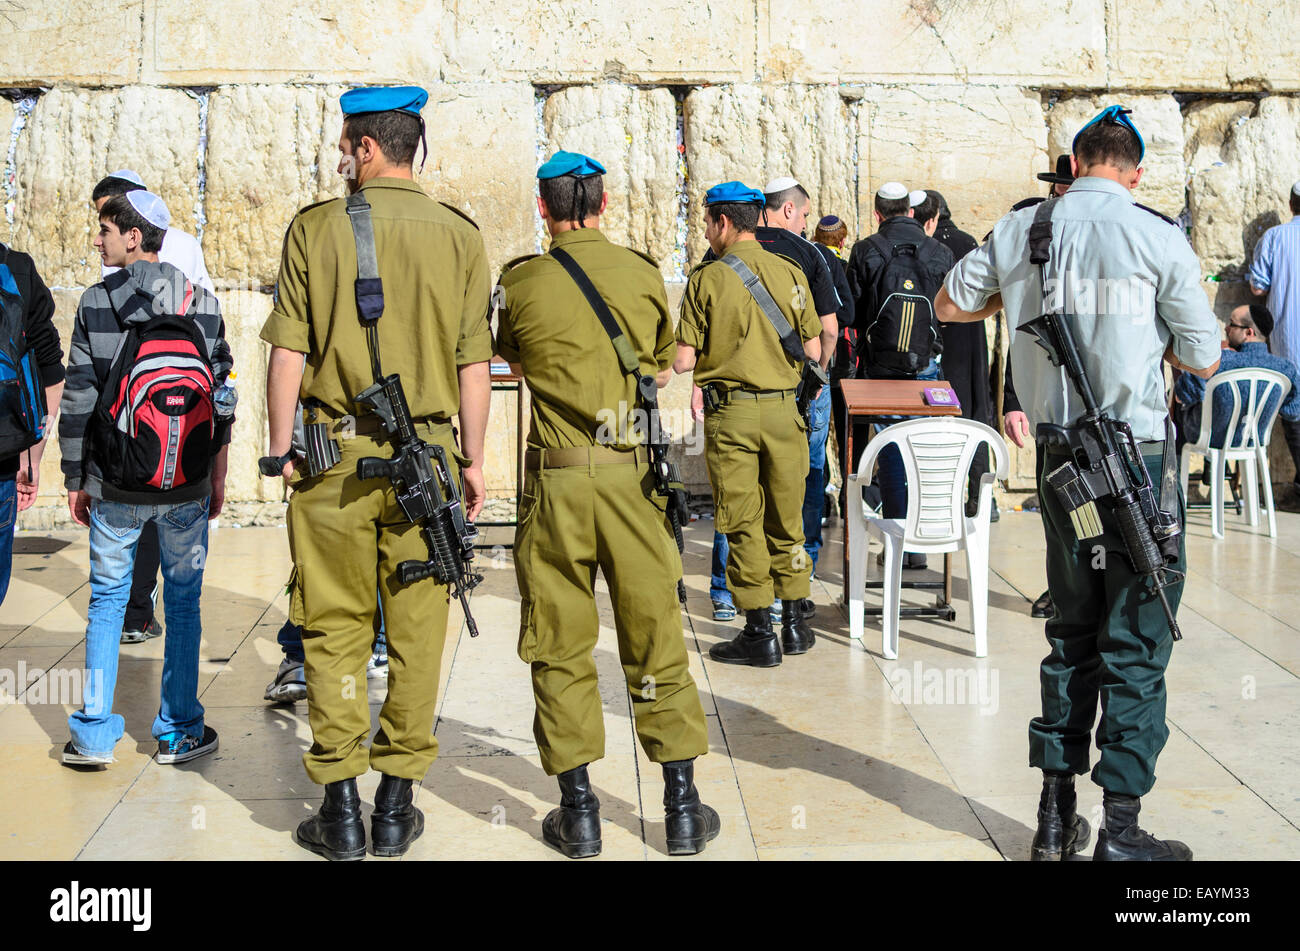 JERUSALEM, ISRAEL - FEBRUARY 23, 2012: Israeli Soldiers stand guard at the Western Wall. Stock Photo